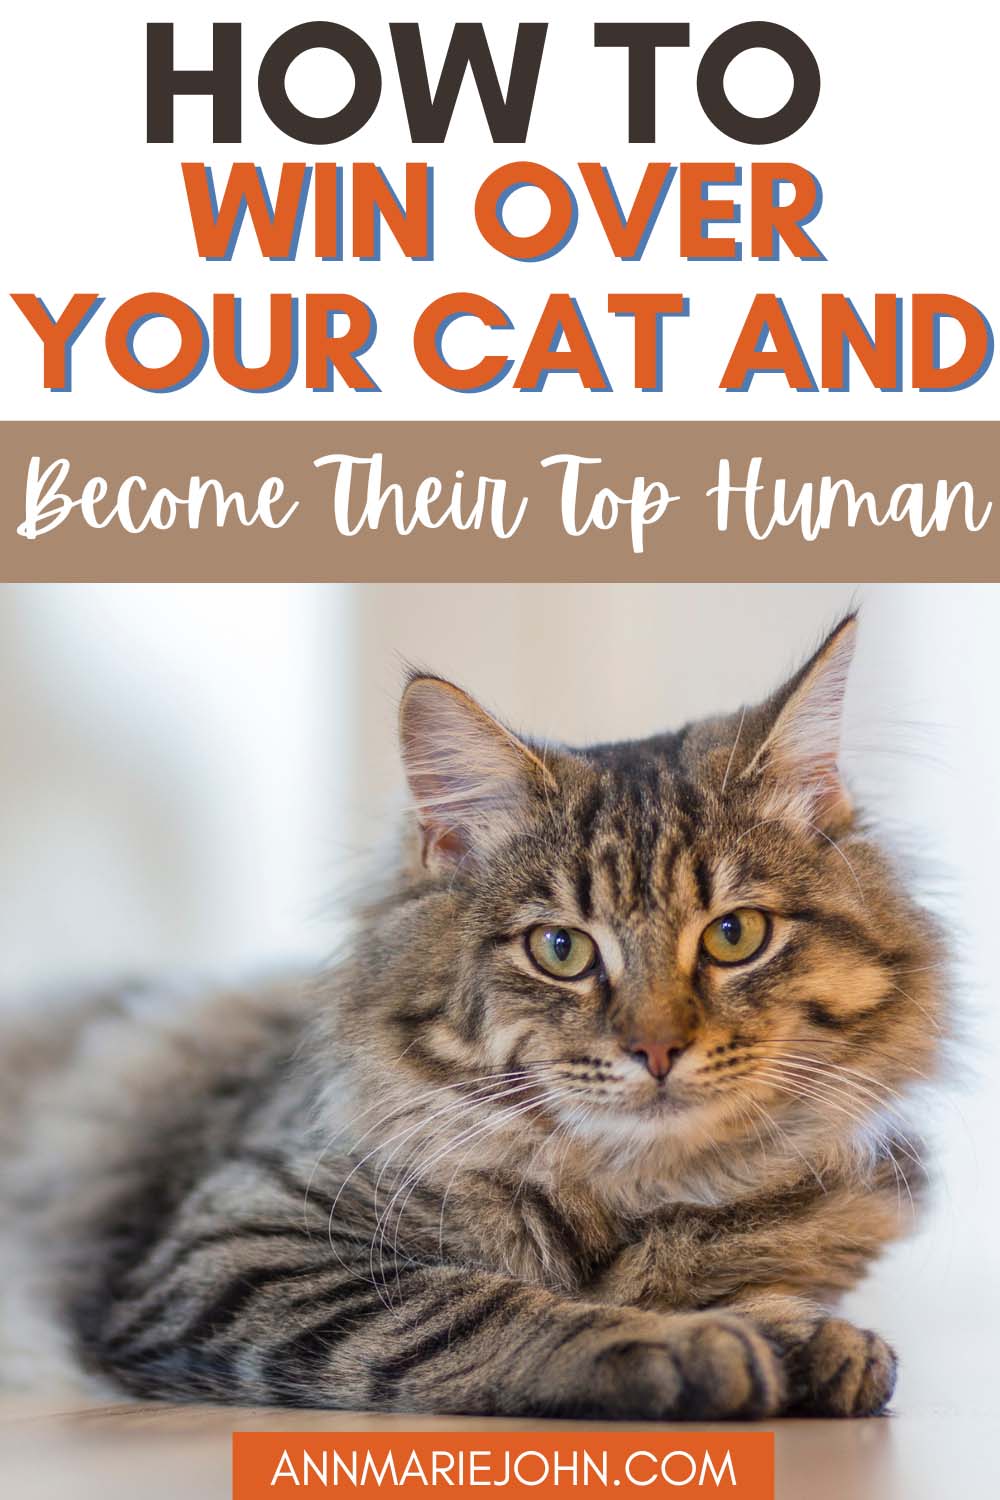 How to Win Over Your Cat and Become Their Top Human